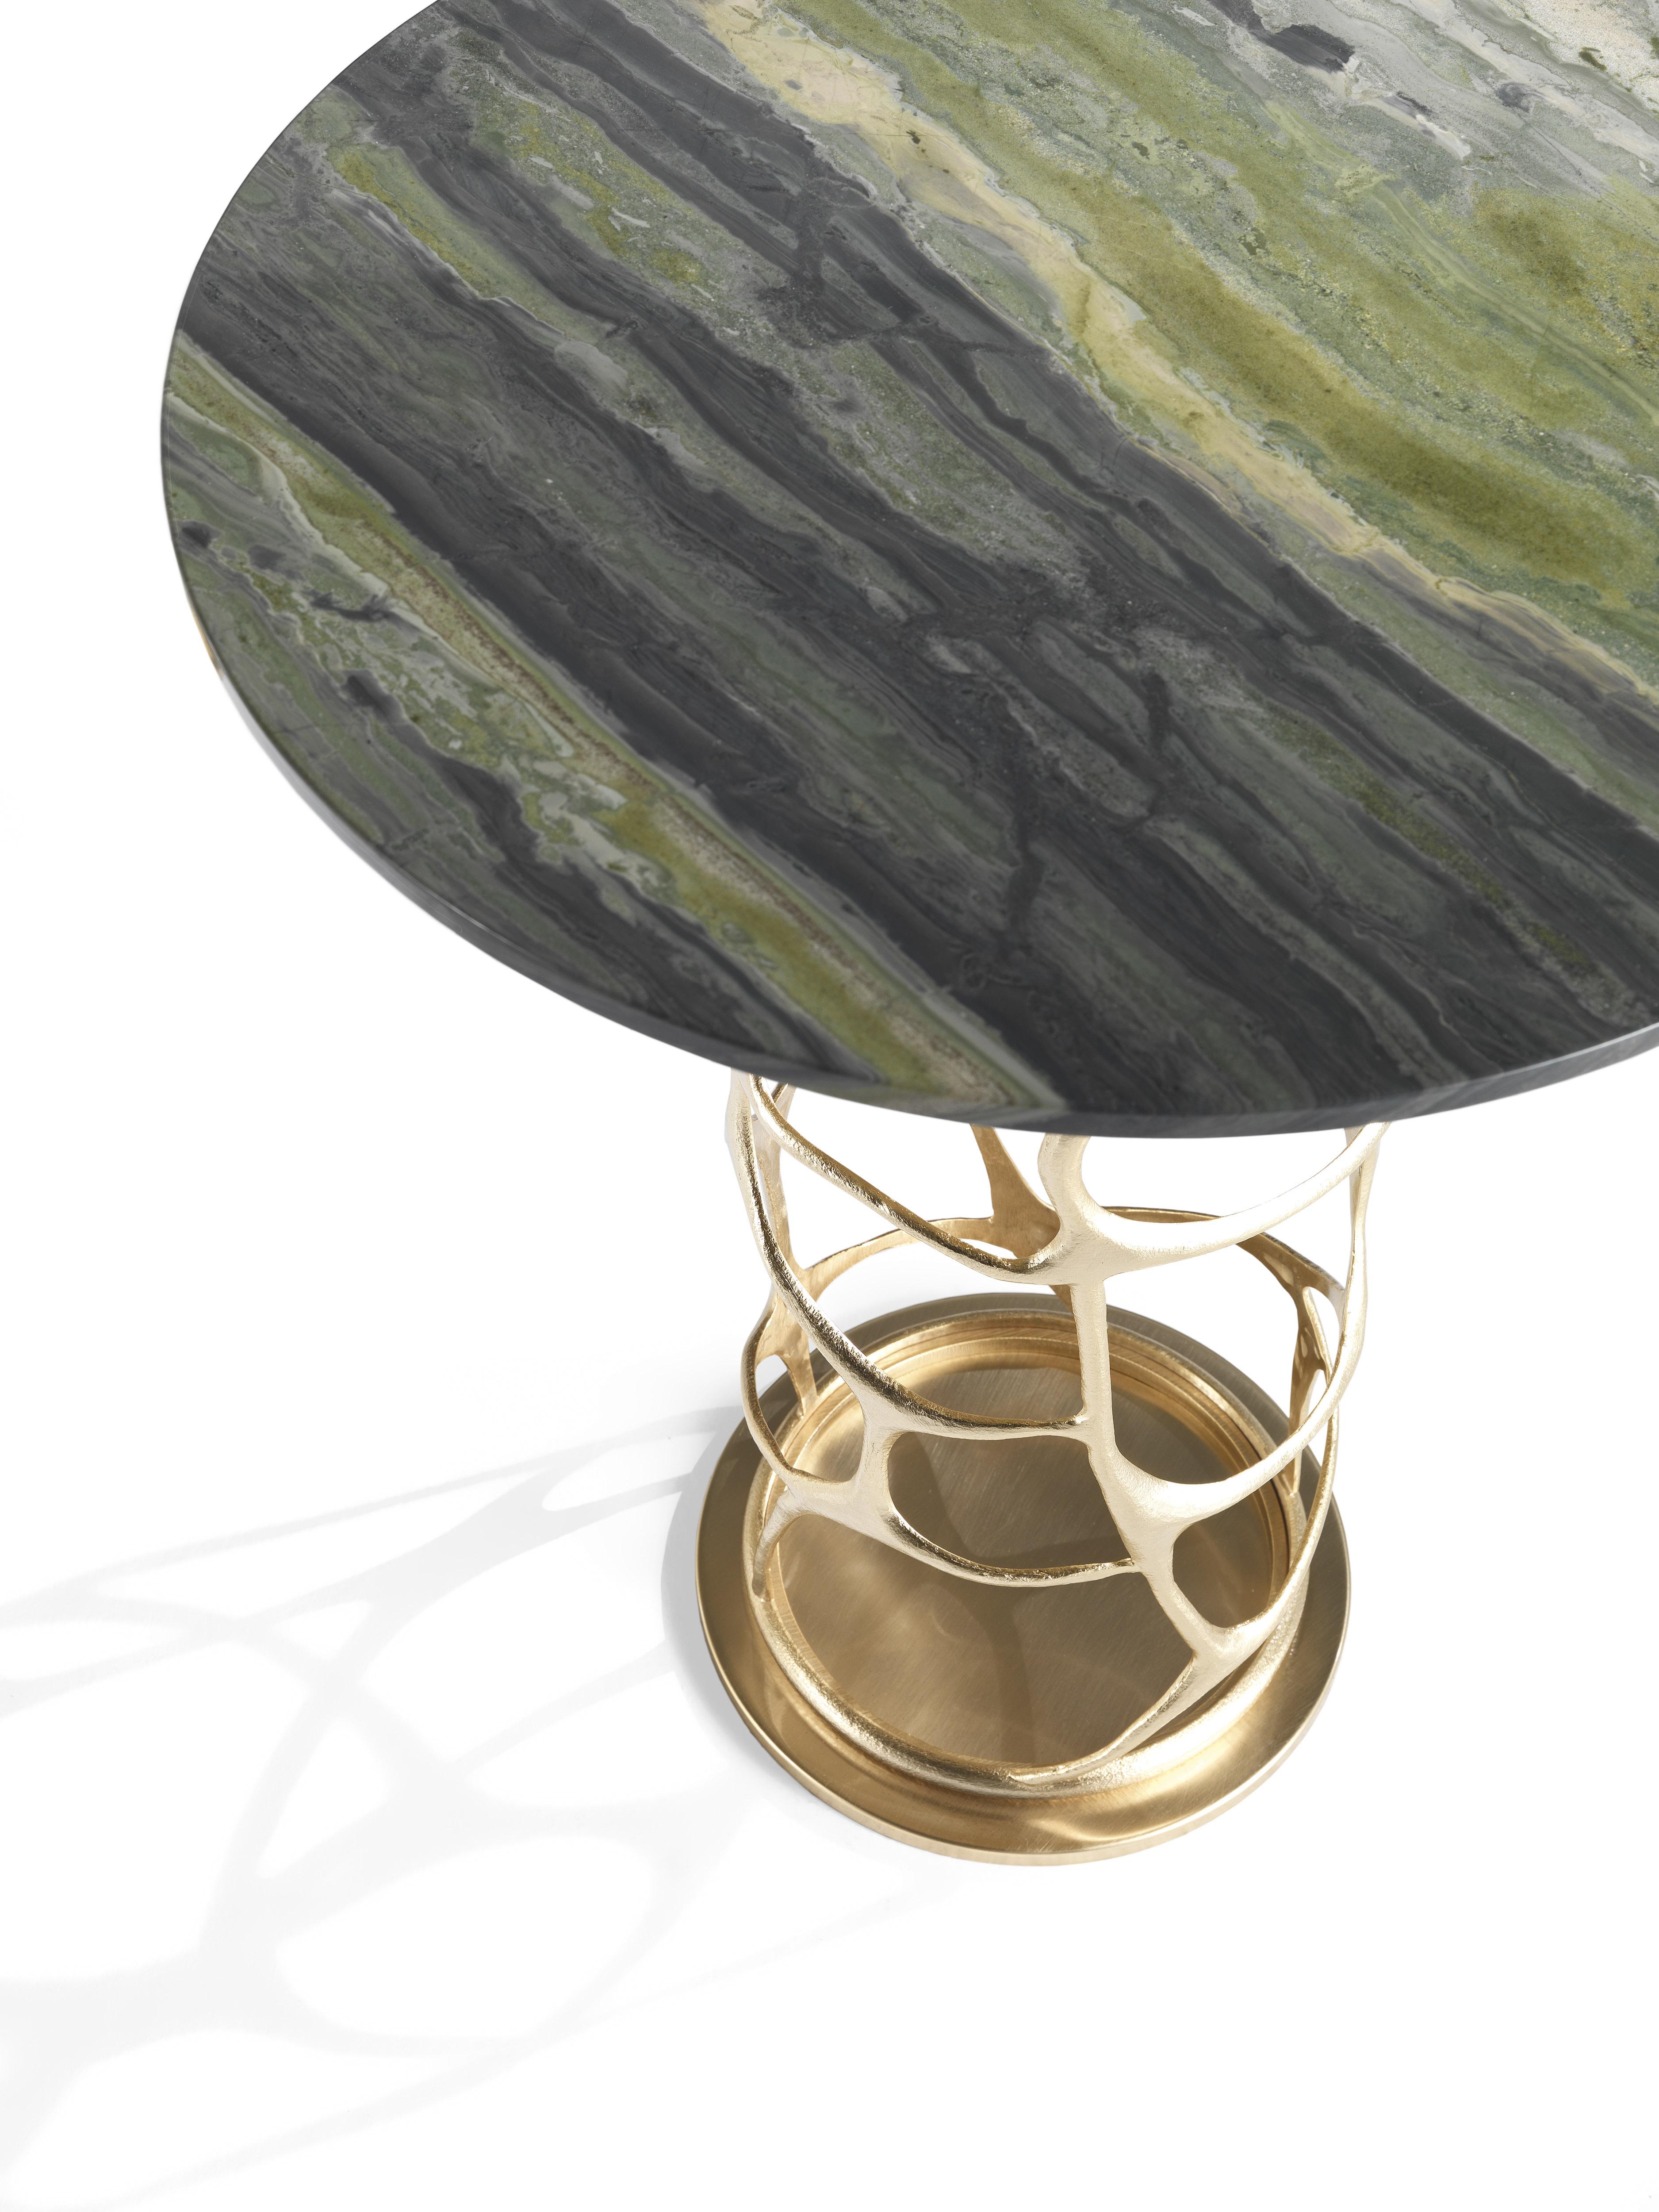 With the elegant bamboo marble top in an original green shade, Sioraf small table features a special base made of handmade brass castings, chiseled by hand and gold-plated. A precious piece of furniture easy to combine with the other elements of the